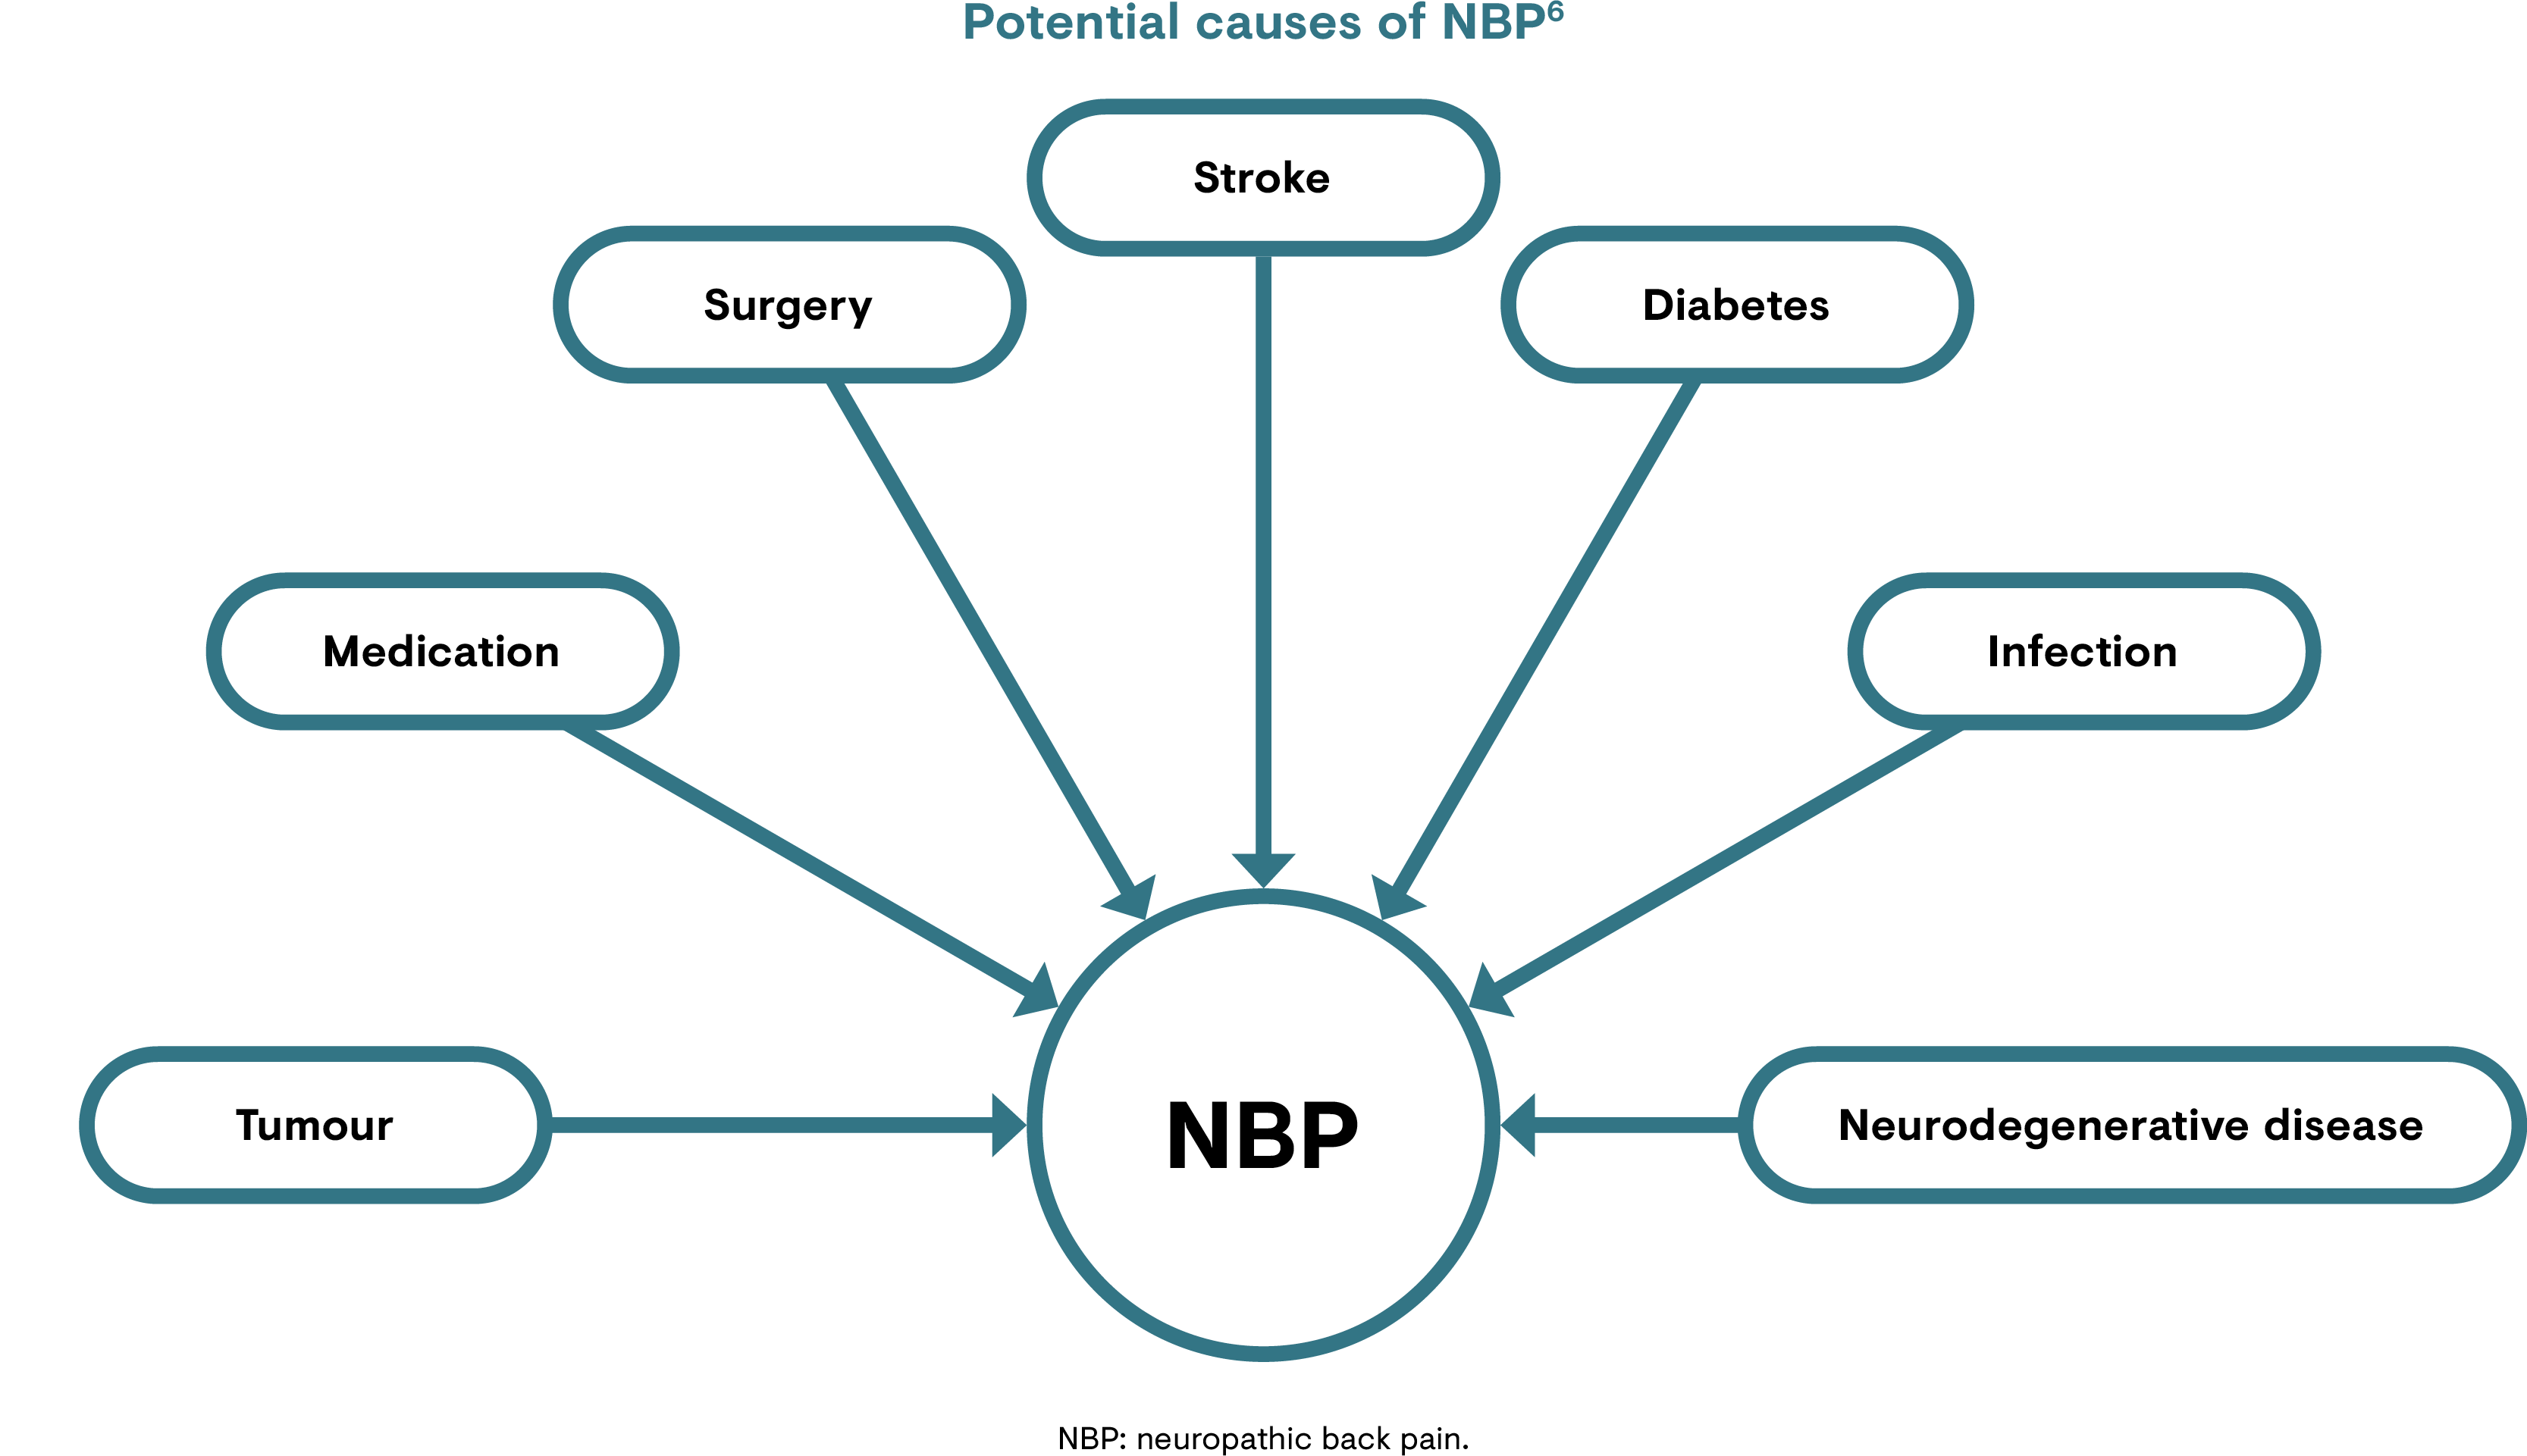 Potential causes of neuropathic back pain (NBP)